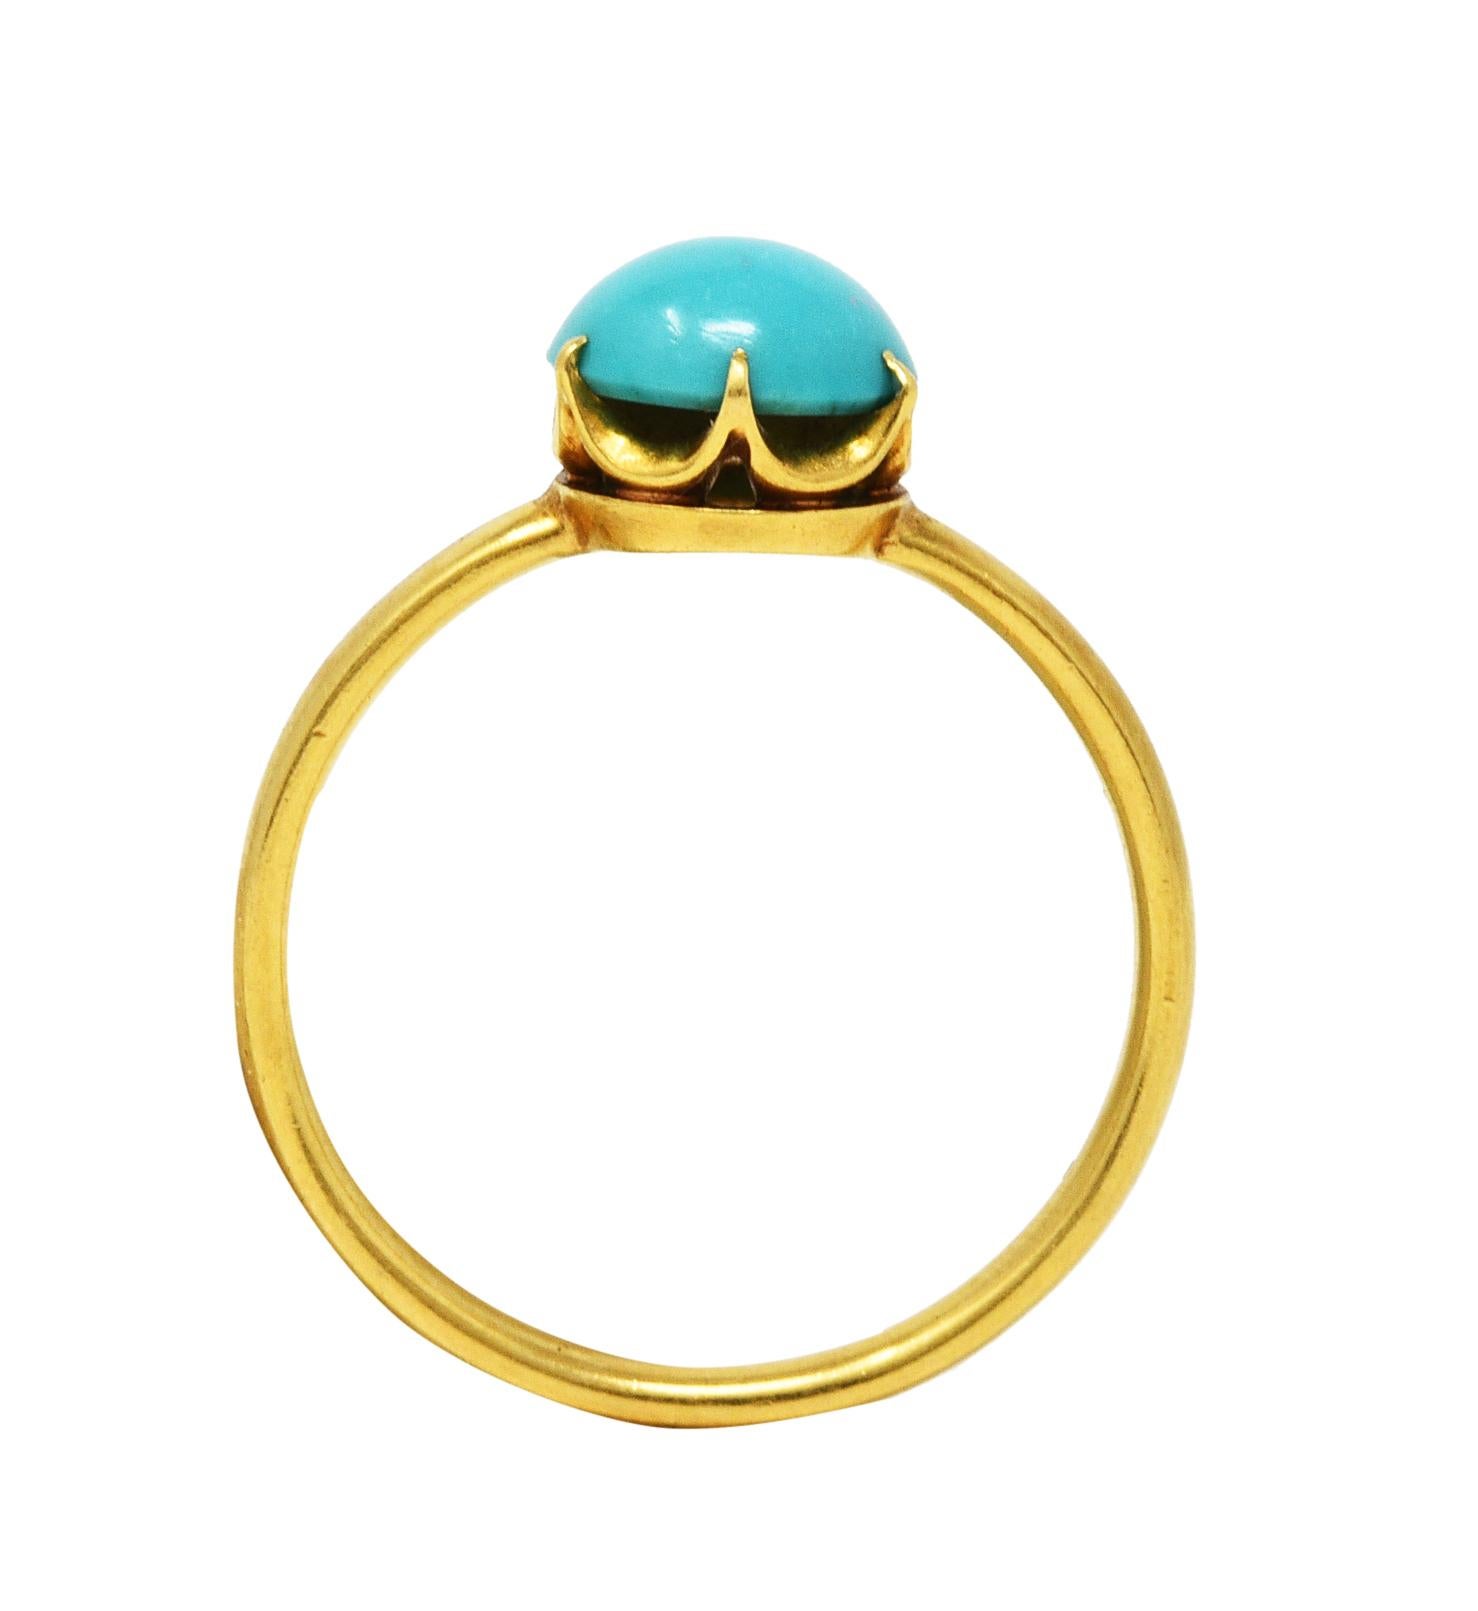 1960's Tiffany & Co. Turquoise 18 Karat Gold Solitaire Ring 2